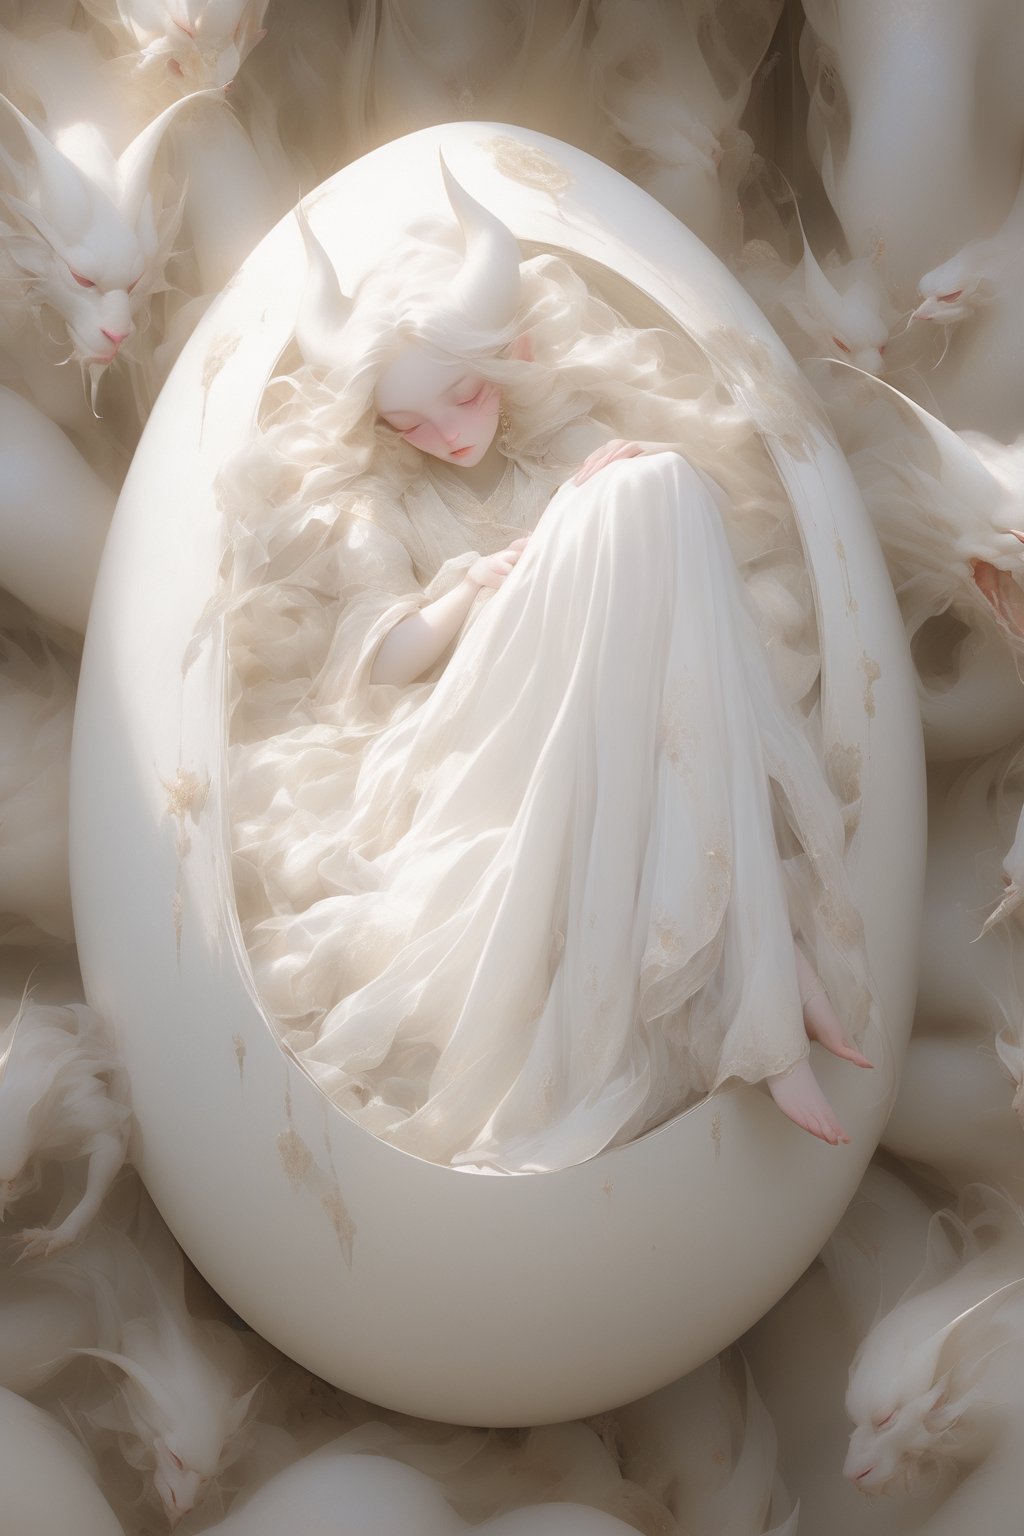 albino Persian  demon girl,lounging in an egg-shaped cradle. Her slender figure reclines comfortably within the smooth, curved interior, surrounded by the warmth and security of the eggshell. With eyes closed and a peaceful expression, she appears serene and content, her pale skin glowing softly in the gentle light. Long lashes frame her closed eyes, and her delicate features convey a sense of tranquility and beauty. Despite the unconventional setting, she exudes an aura of quiet grace and otherworldly charm